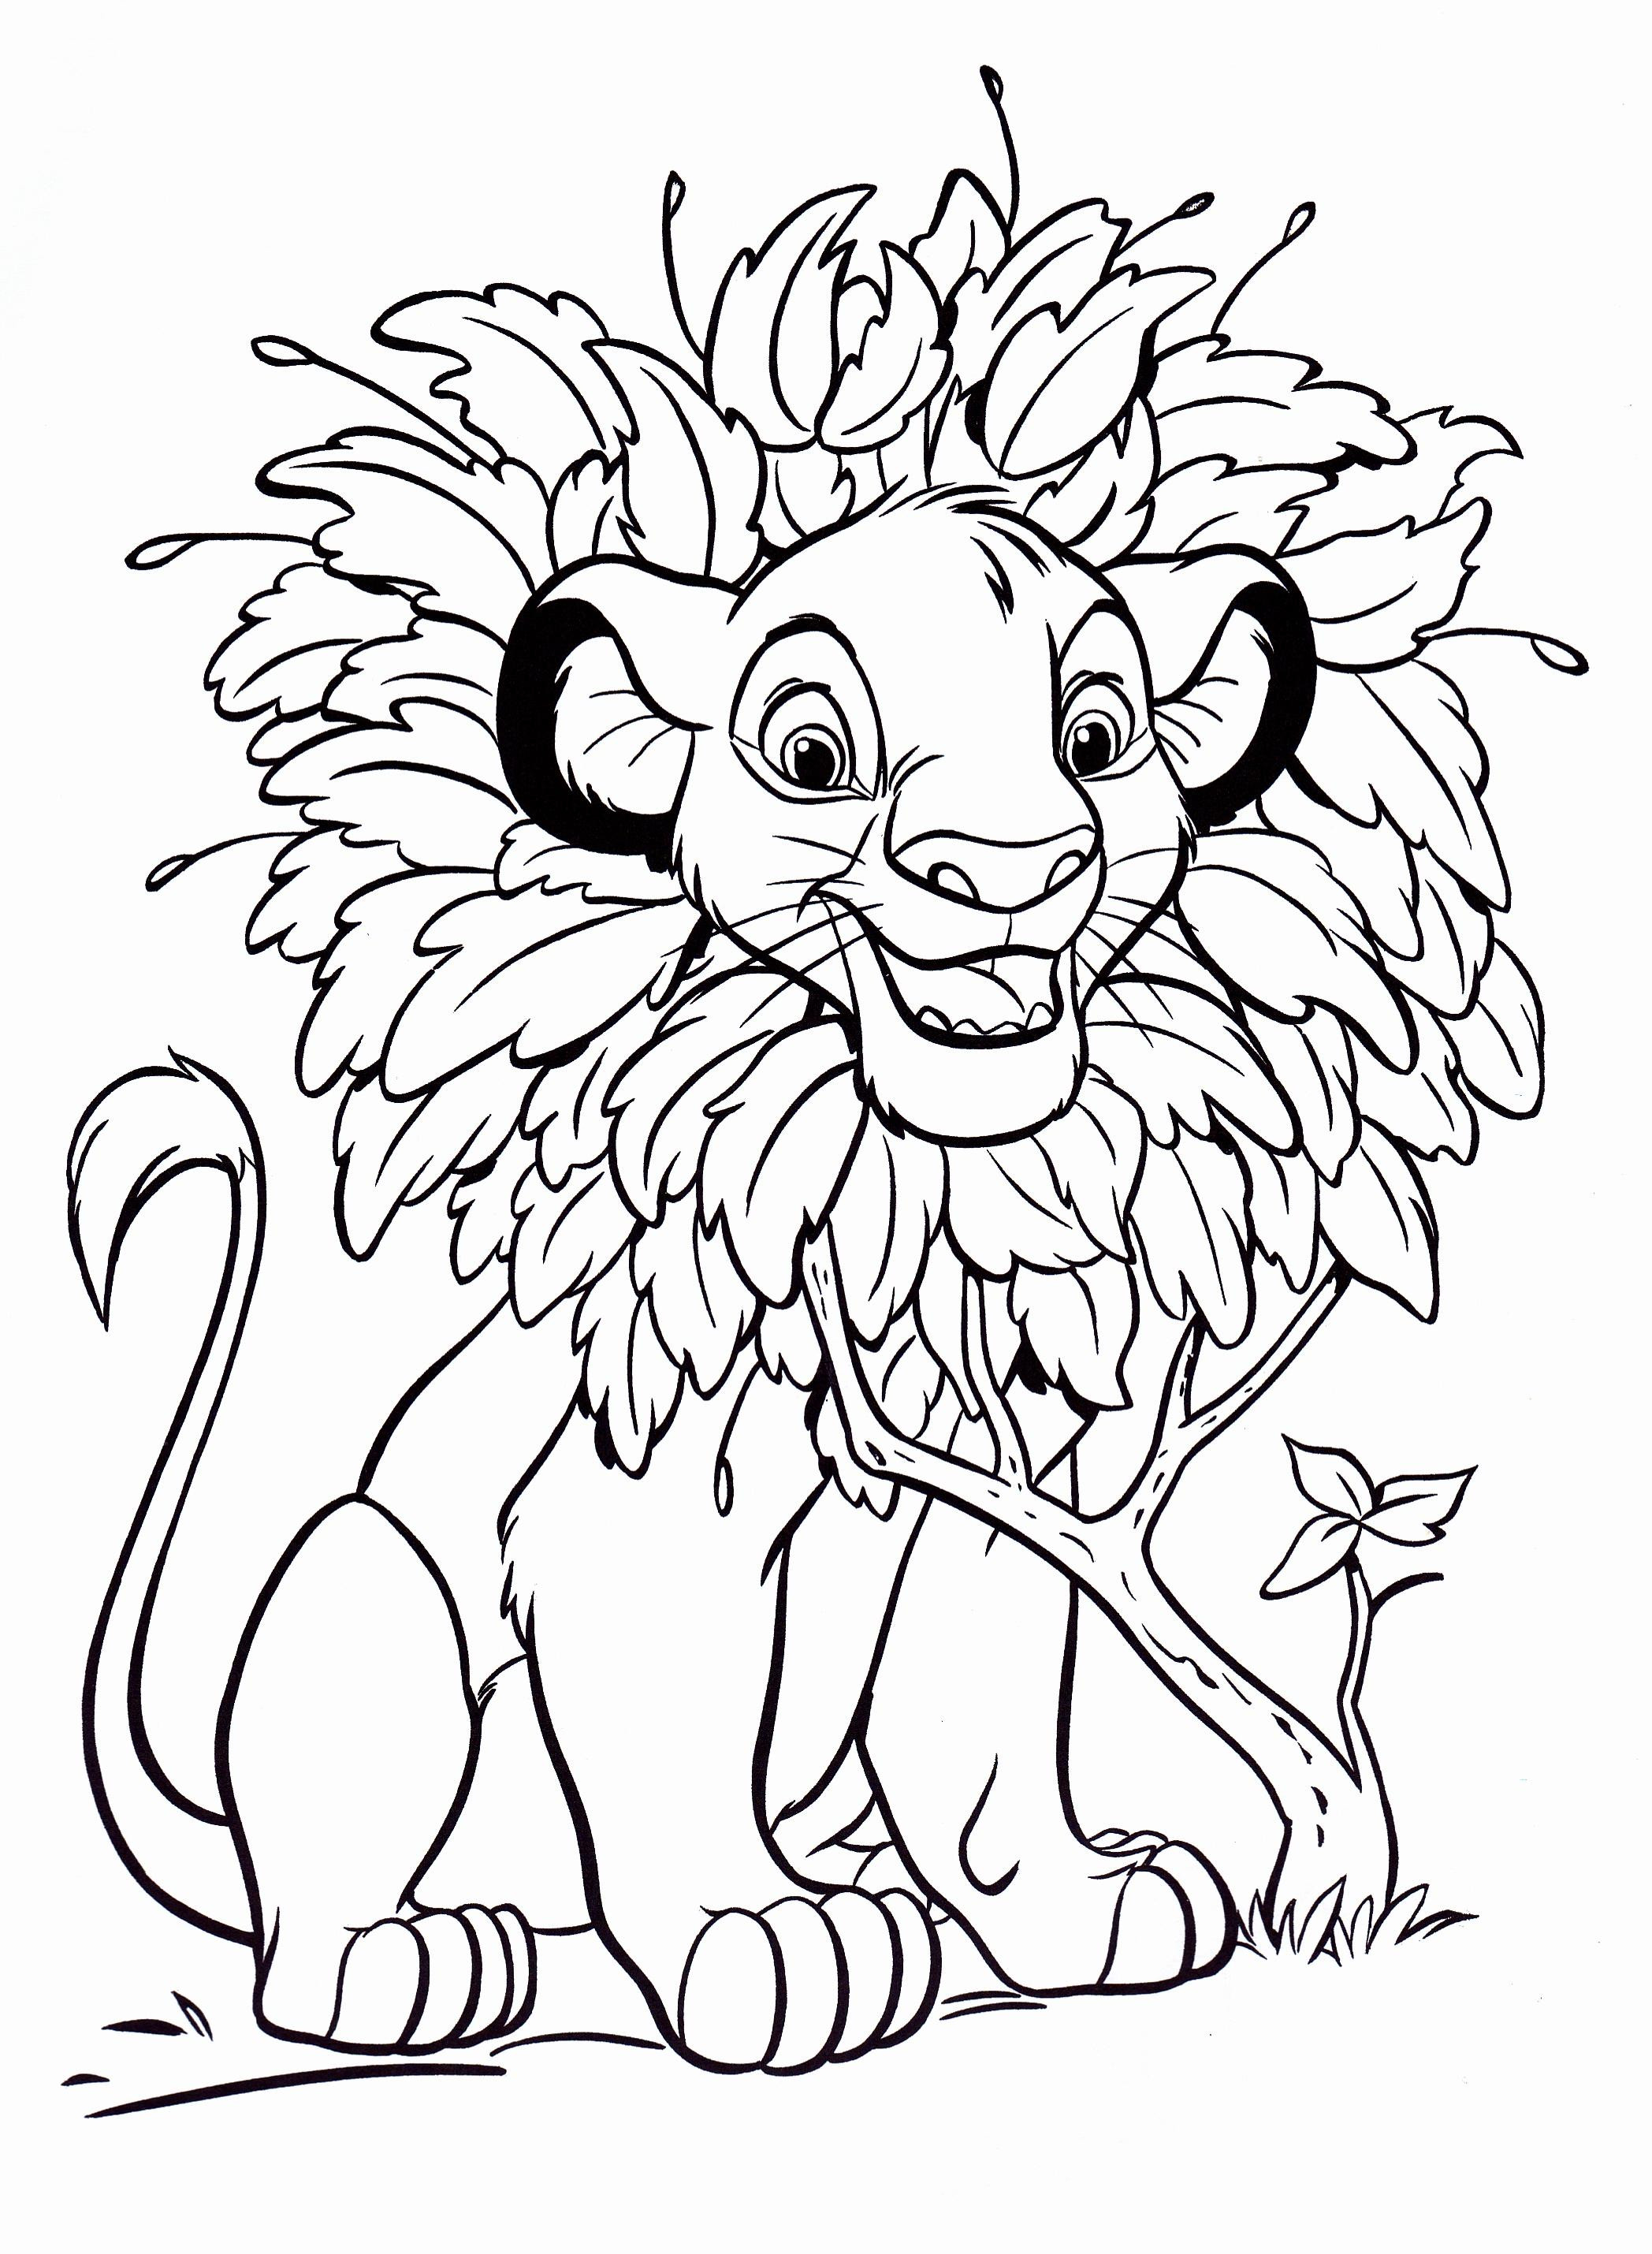 Online Coloring Book For Kids
 Free Coloring Pages Disney For Kids Image 58 Gianfreda